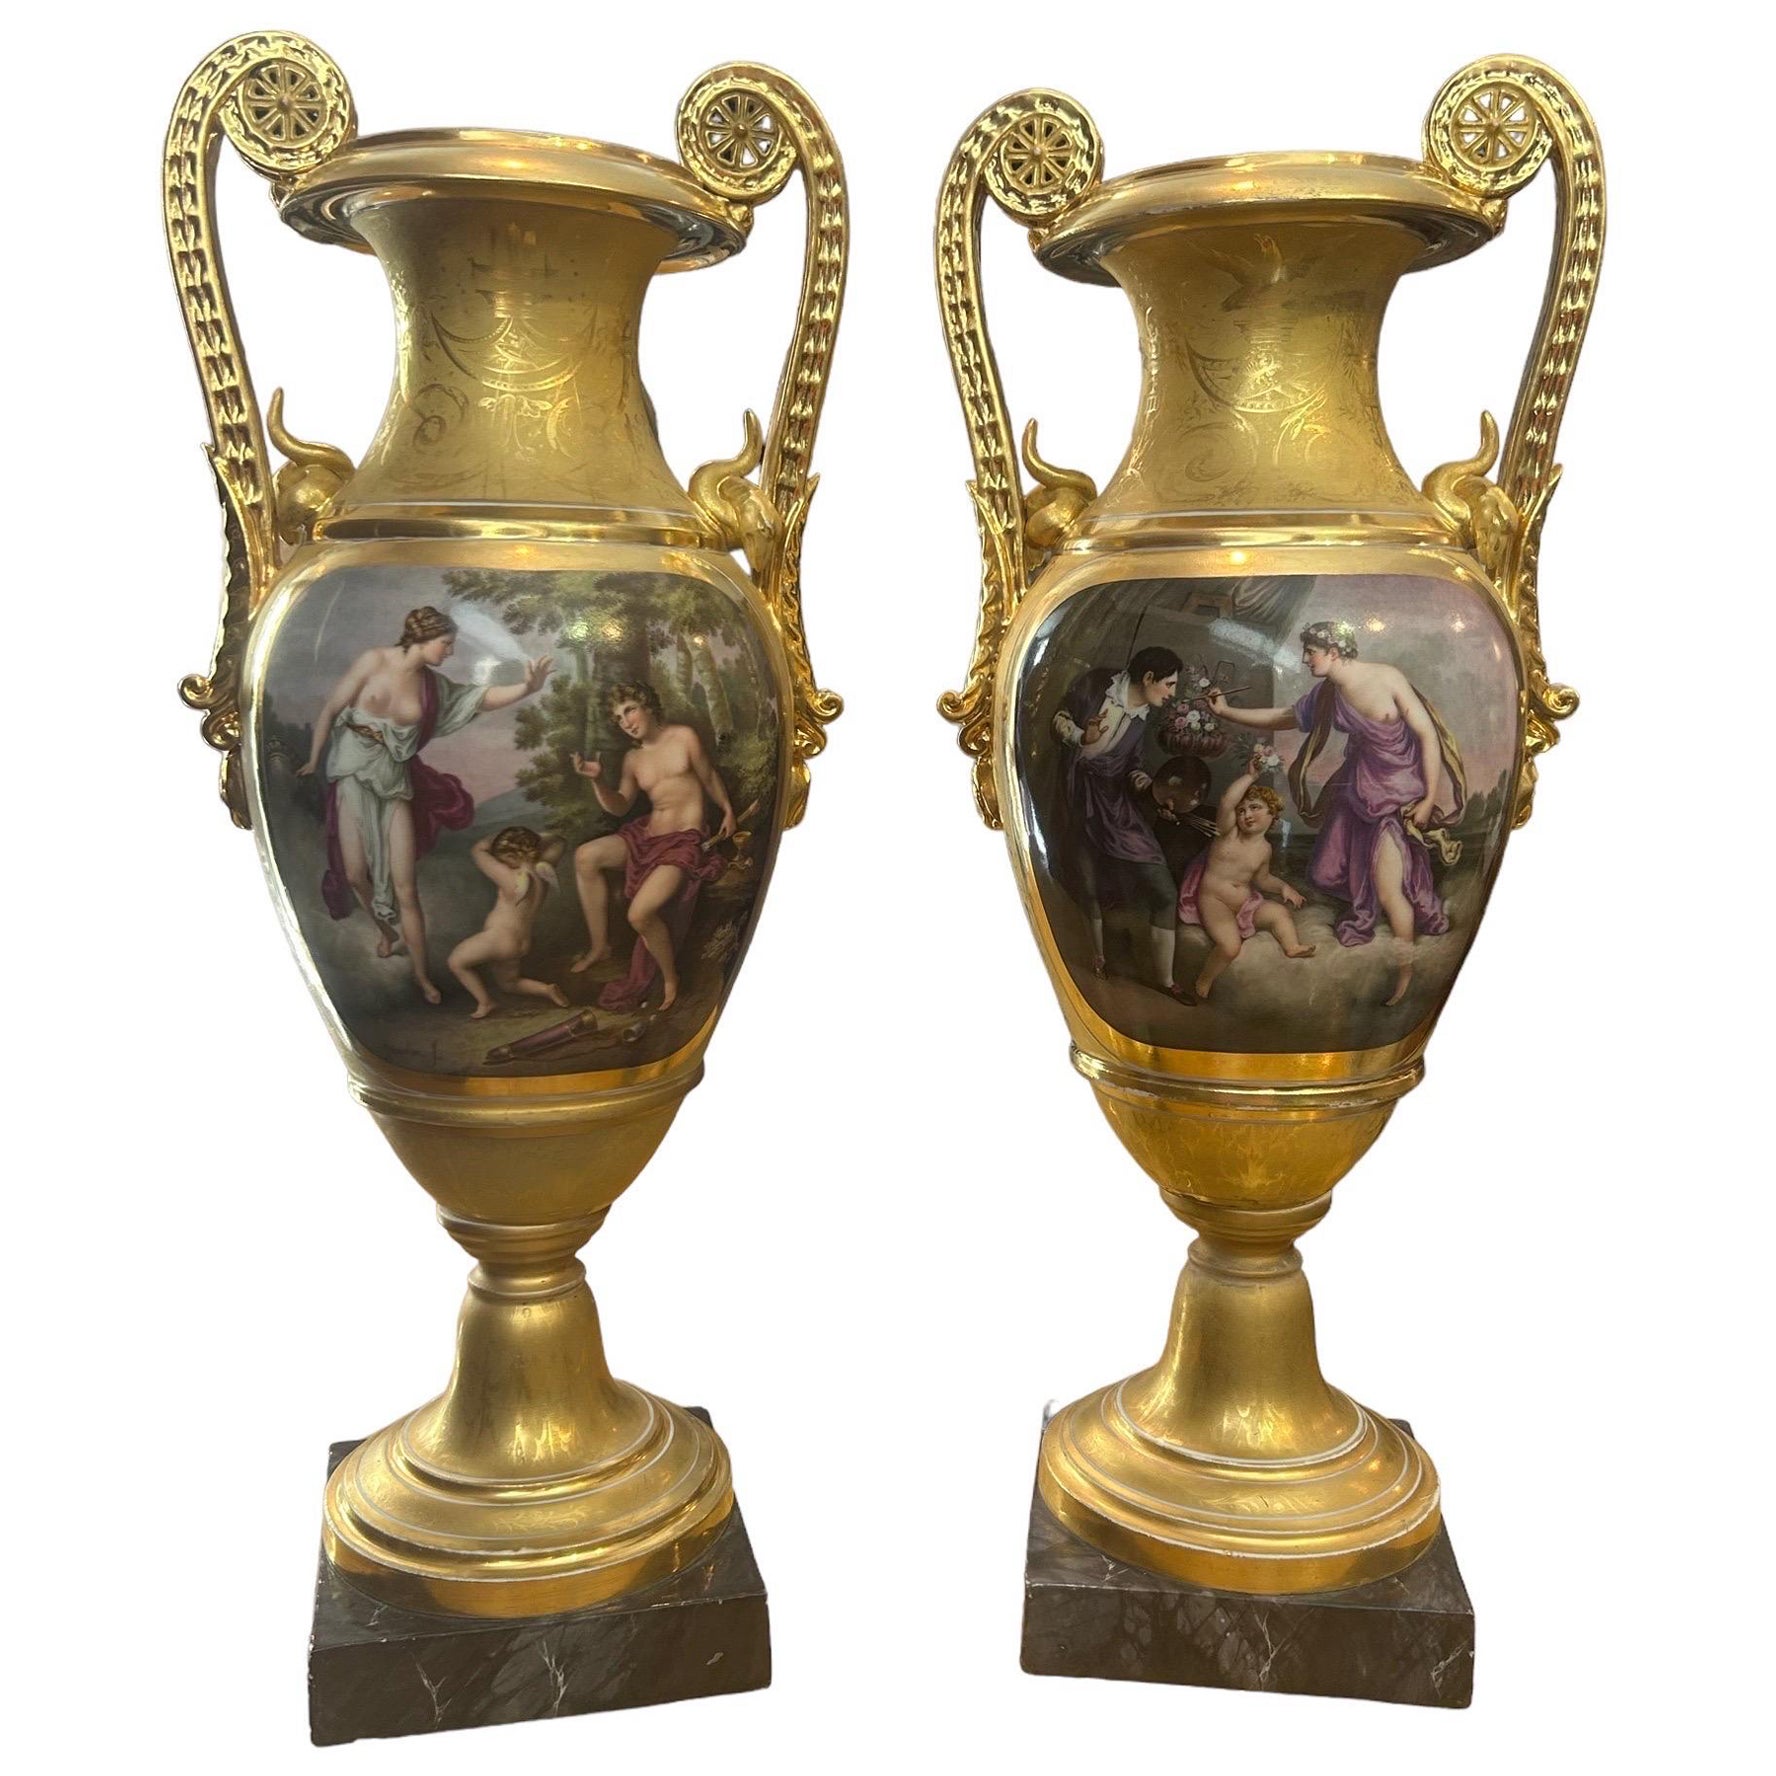 Pair of French Empire period amphorae For Sale